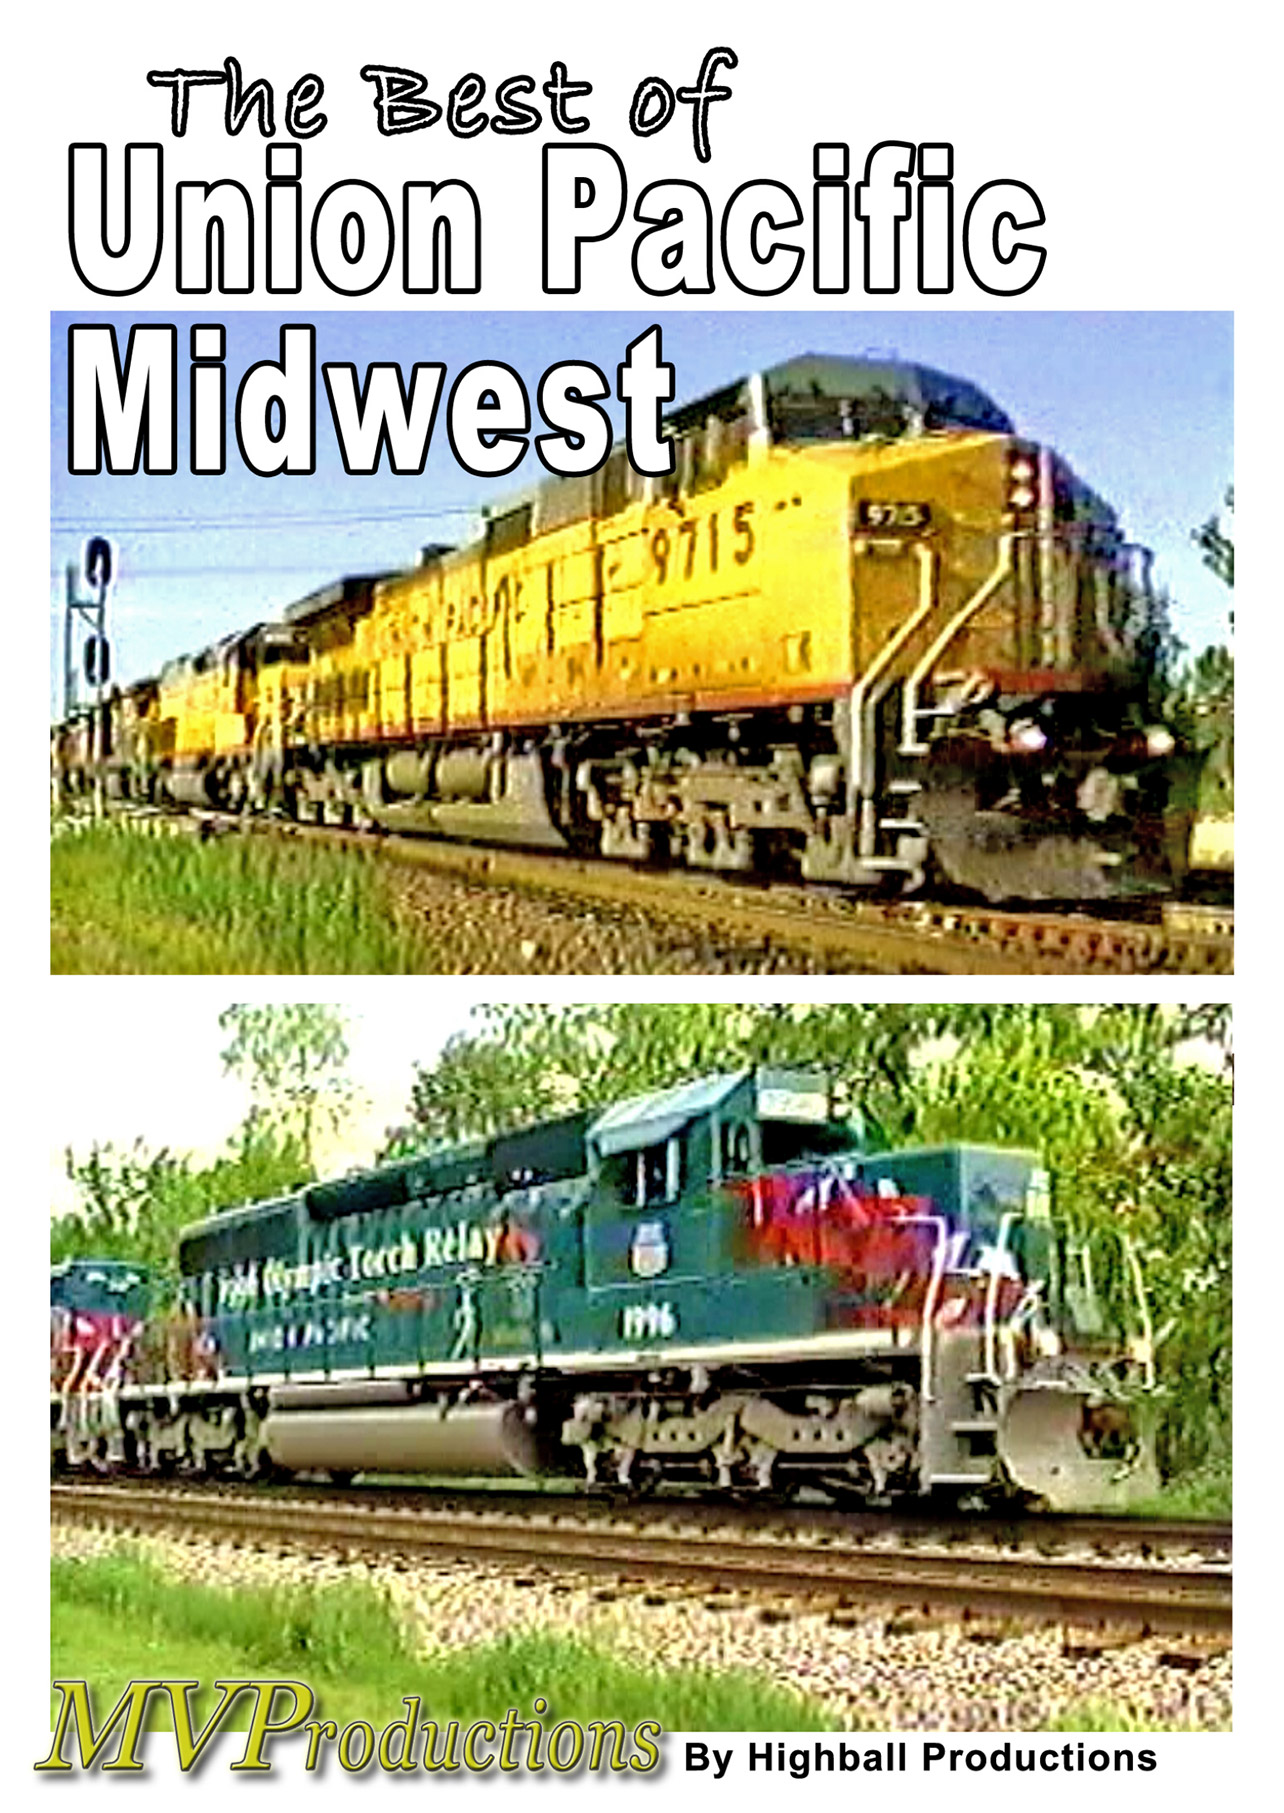 Best of Union Pacific - Midwest Midwest Video Productions MVBUP 601577880288